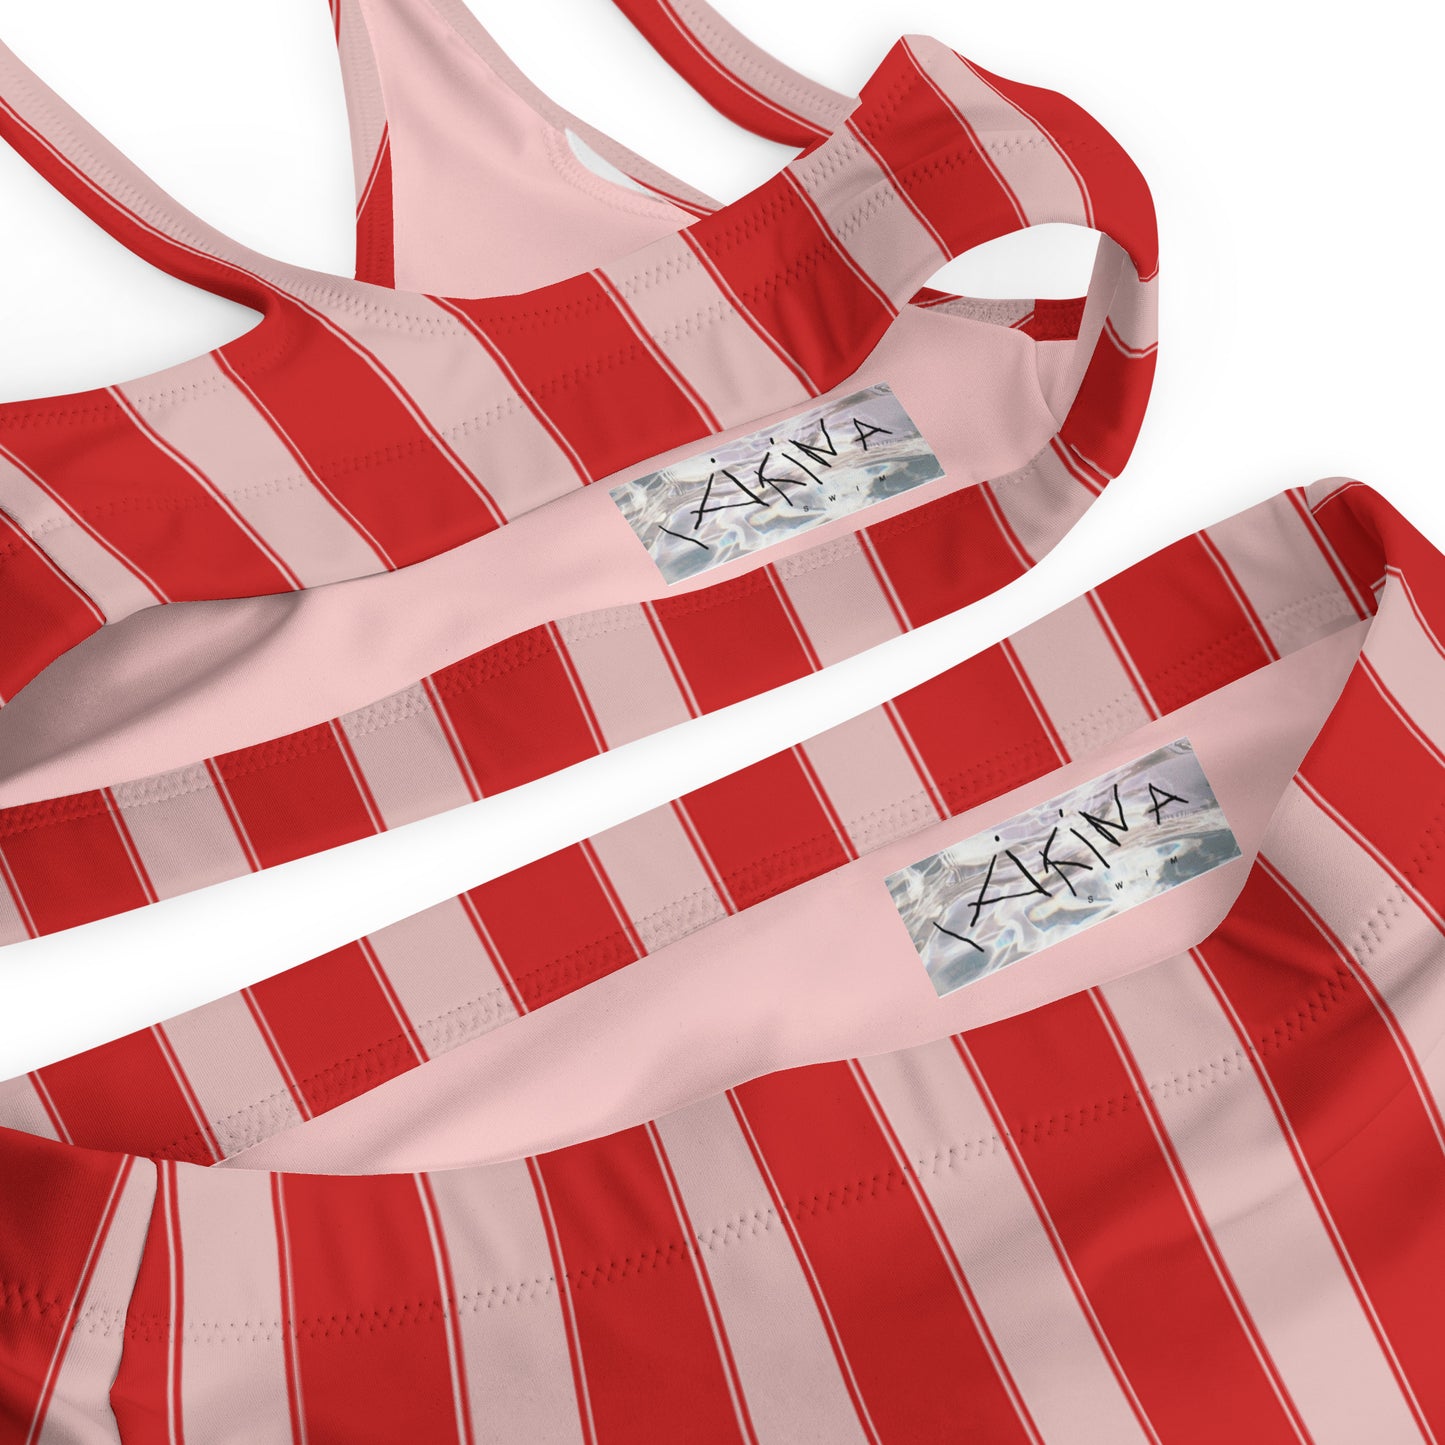 Striped Recycled high-waisted Bikini in Pink and Red